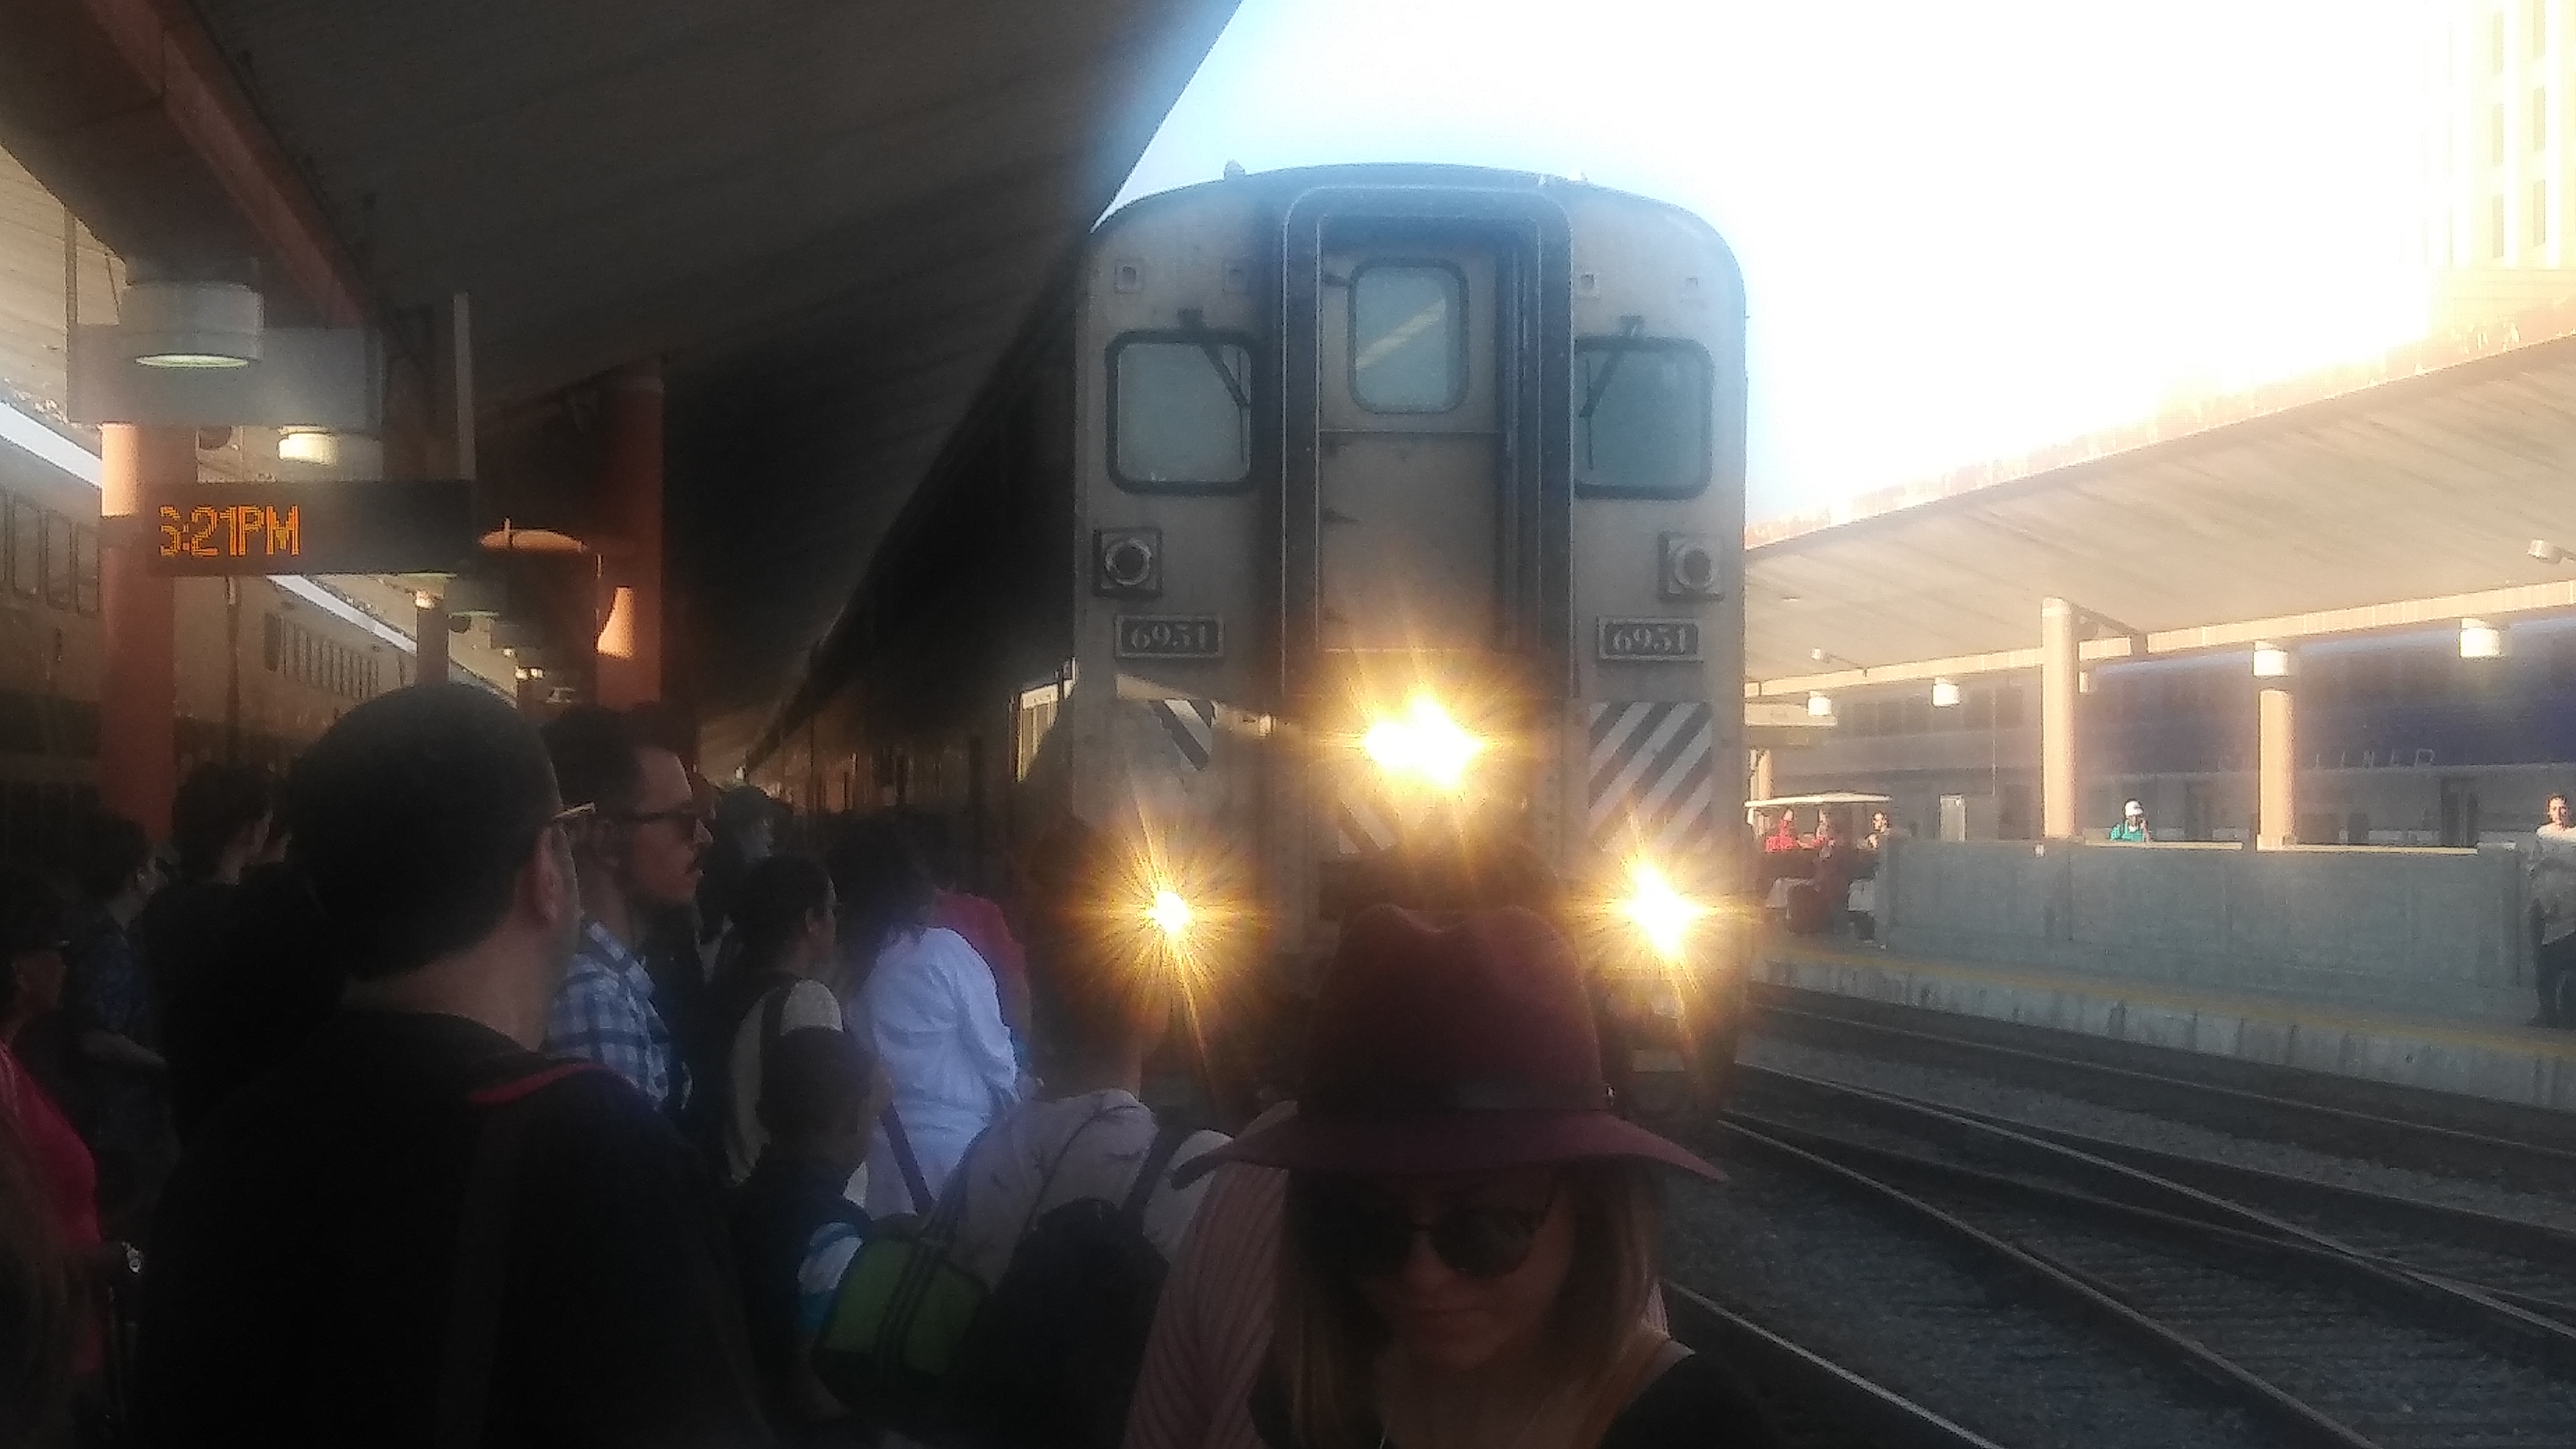 Pictures Of The Amtrak Train To Show The Lateness For Your Reference And Further Review.  Thank You